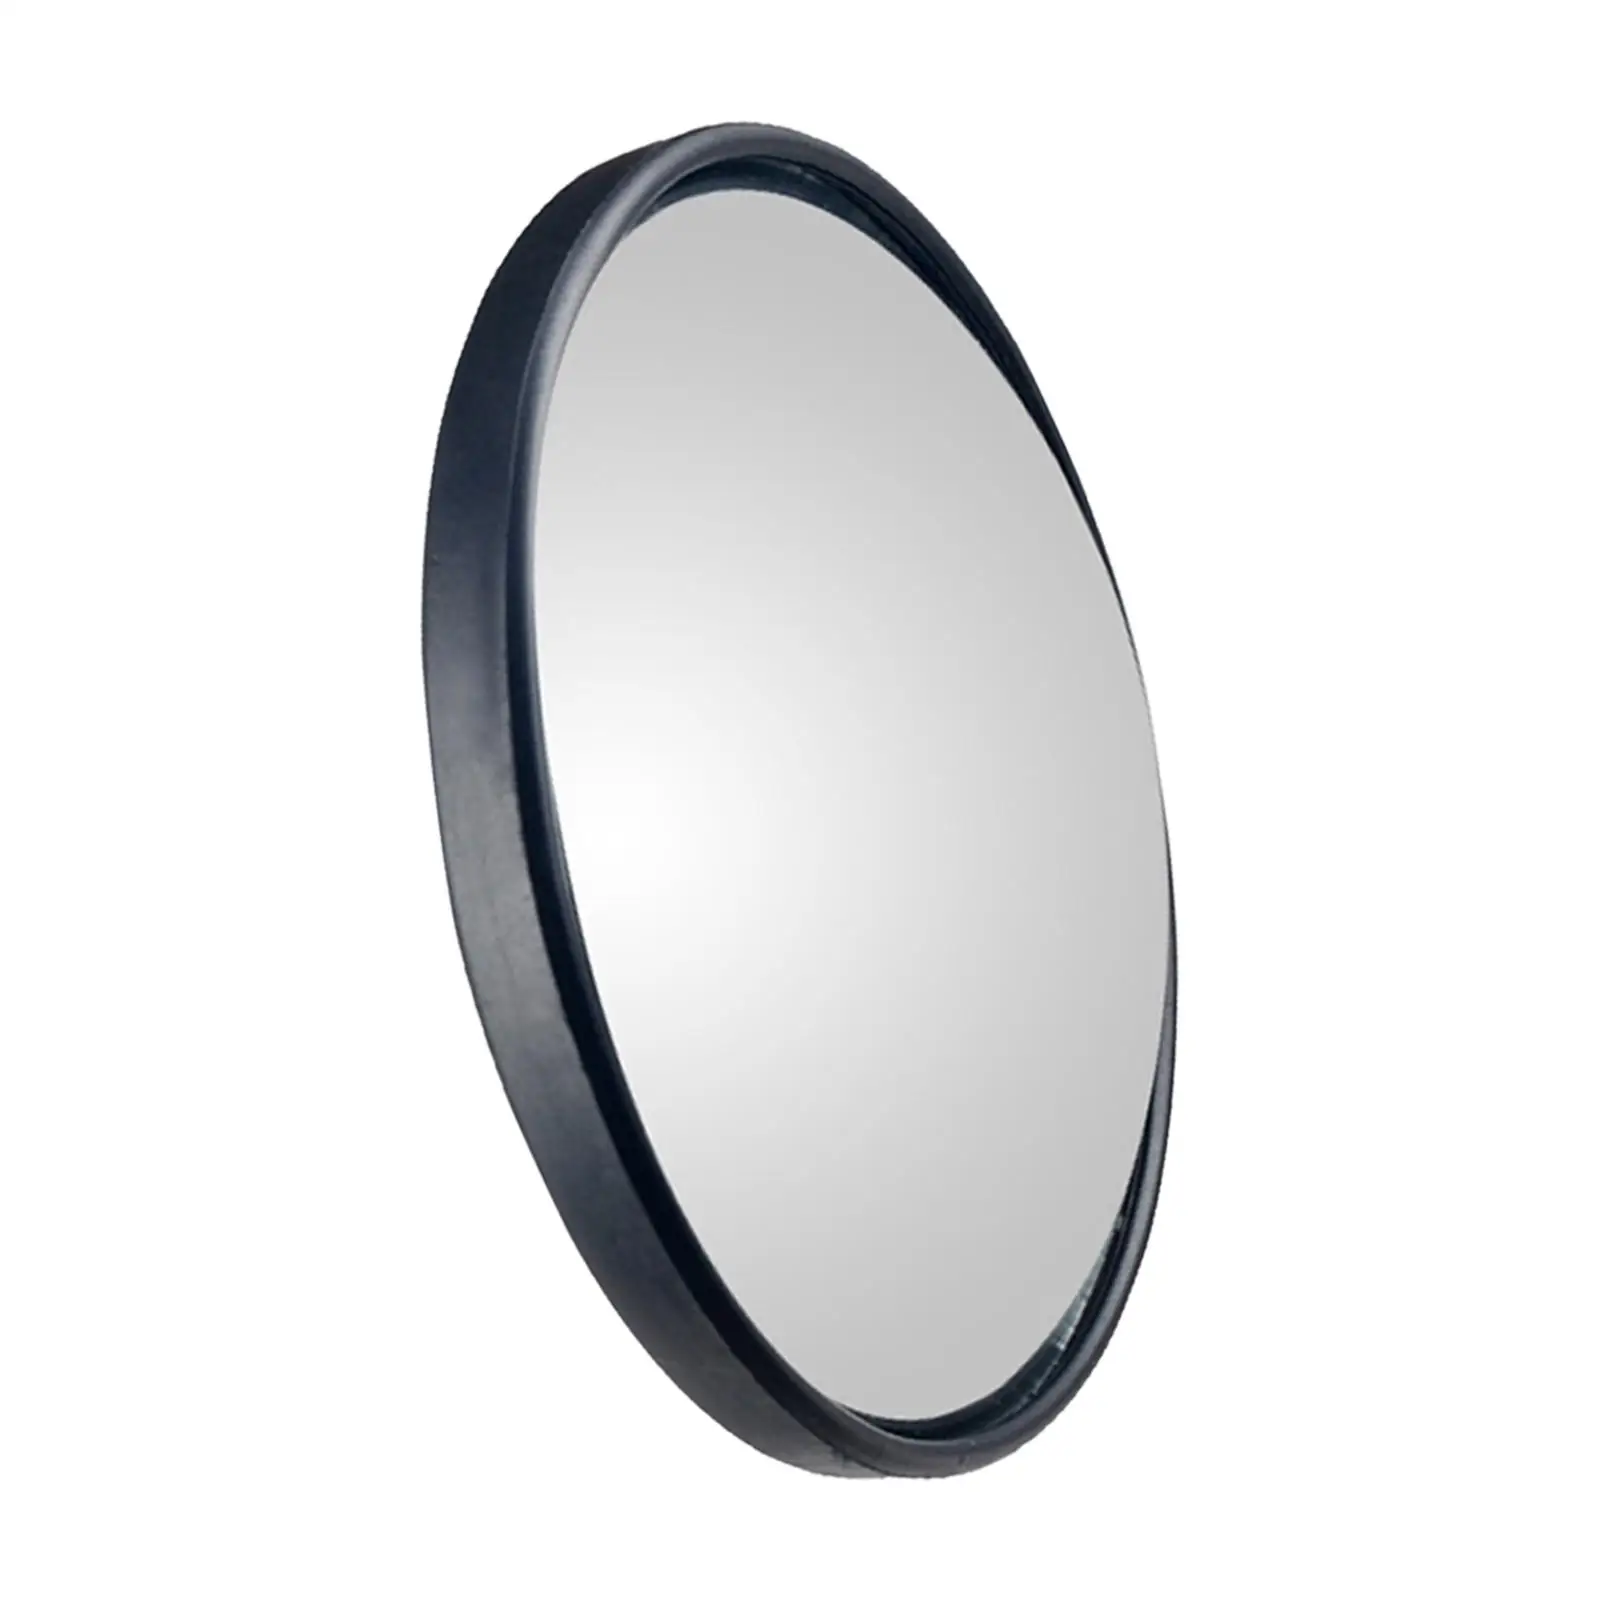 Convex Mirror Round Wide Angle Auxiliary Accessories Fits for School Bus